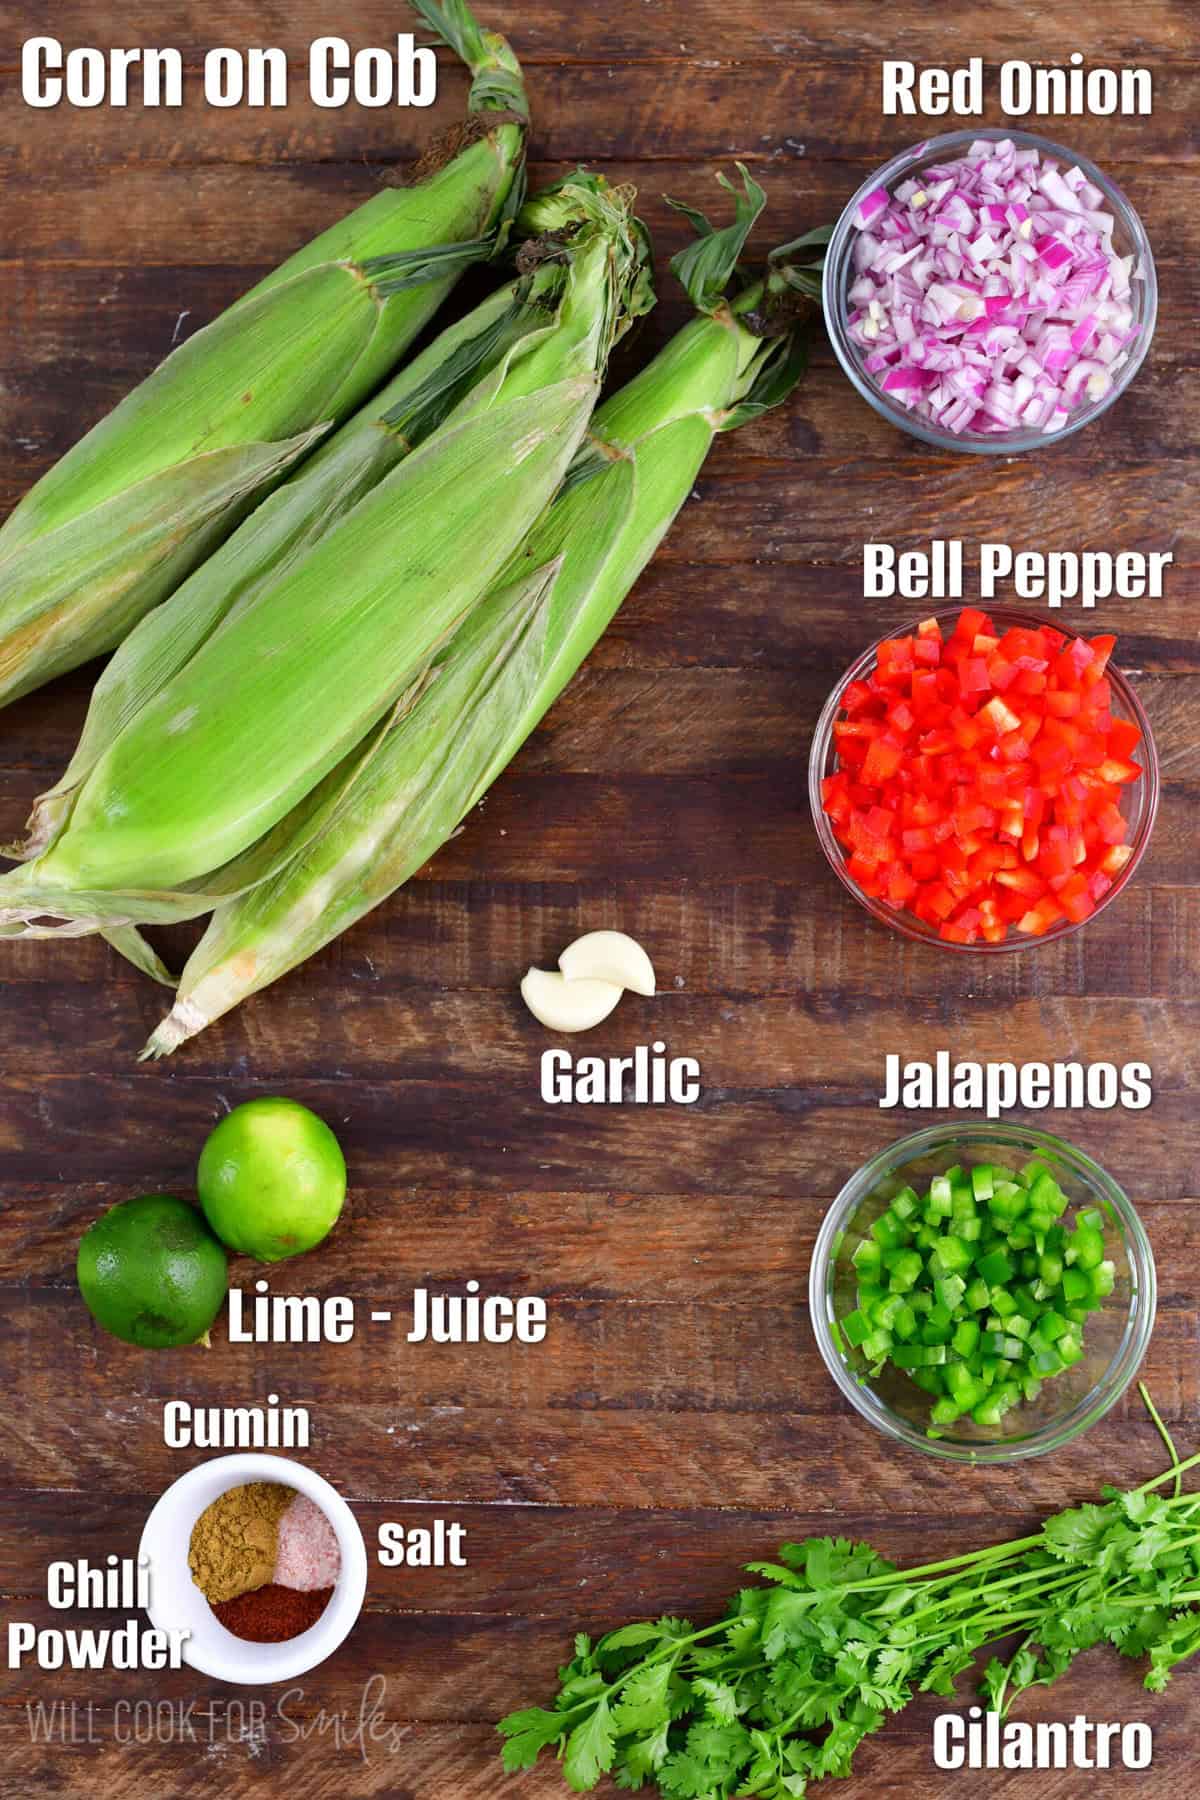 Labeled ingredients for corn salsa on a wood surface.